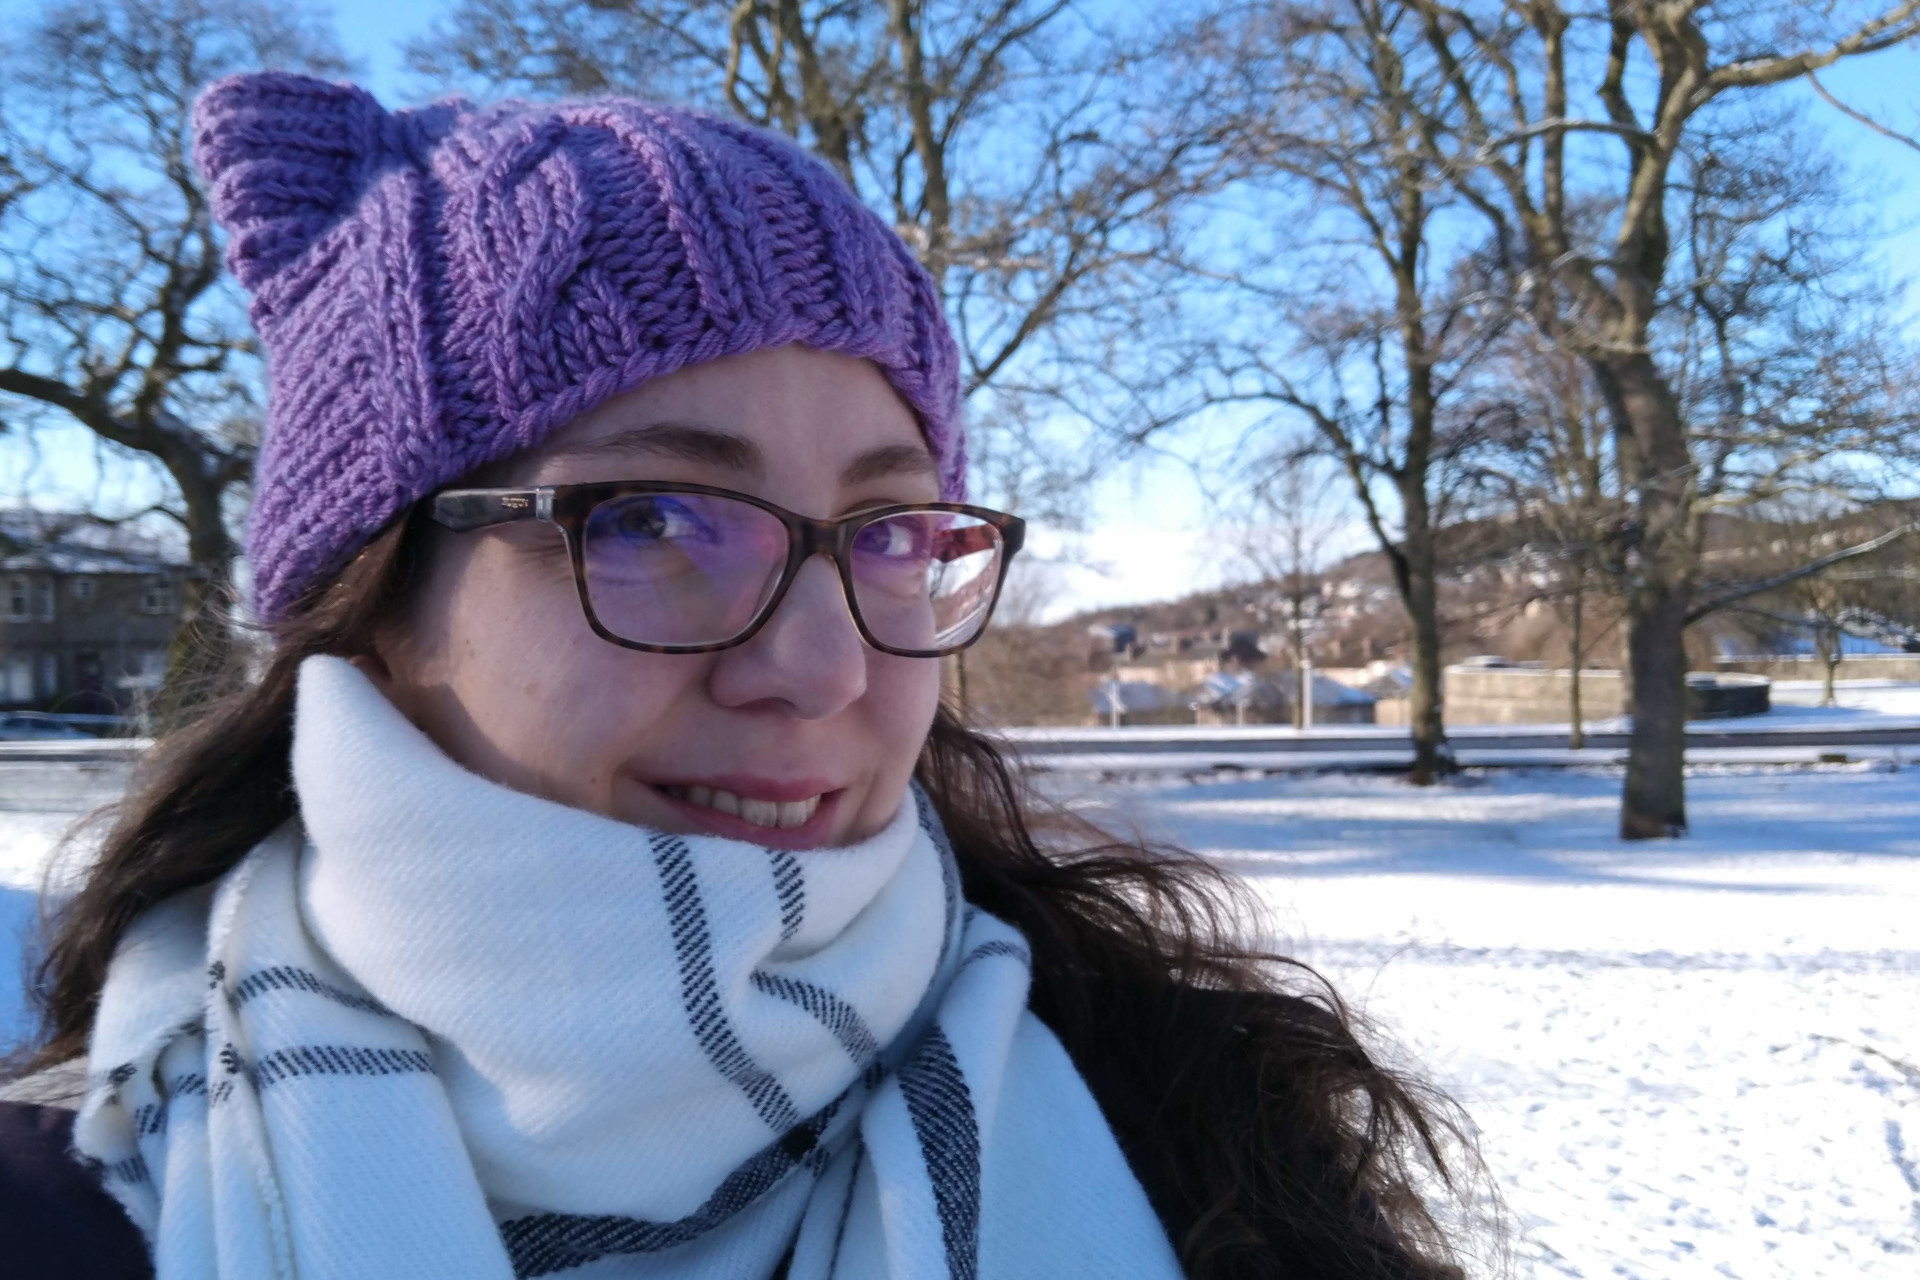 Picture of Maria smiling, in the background is snow covered ground